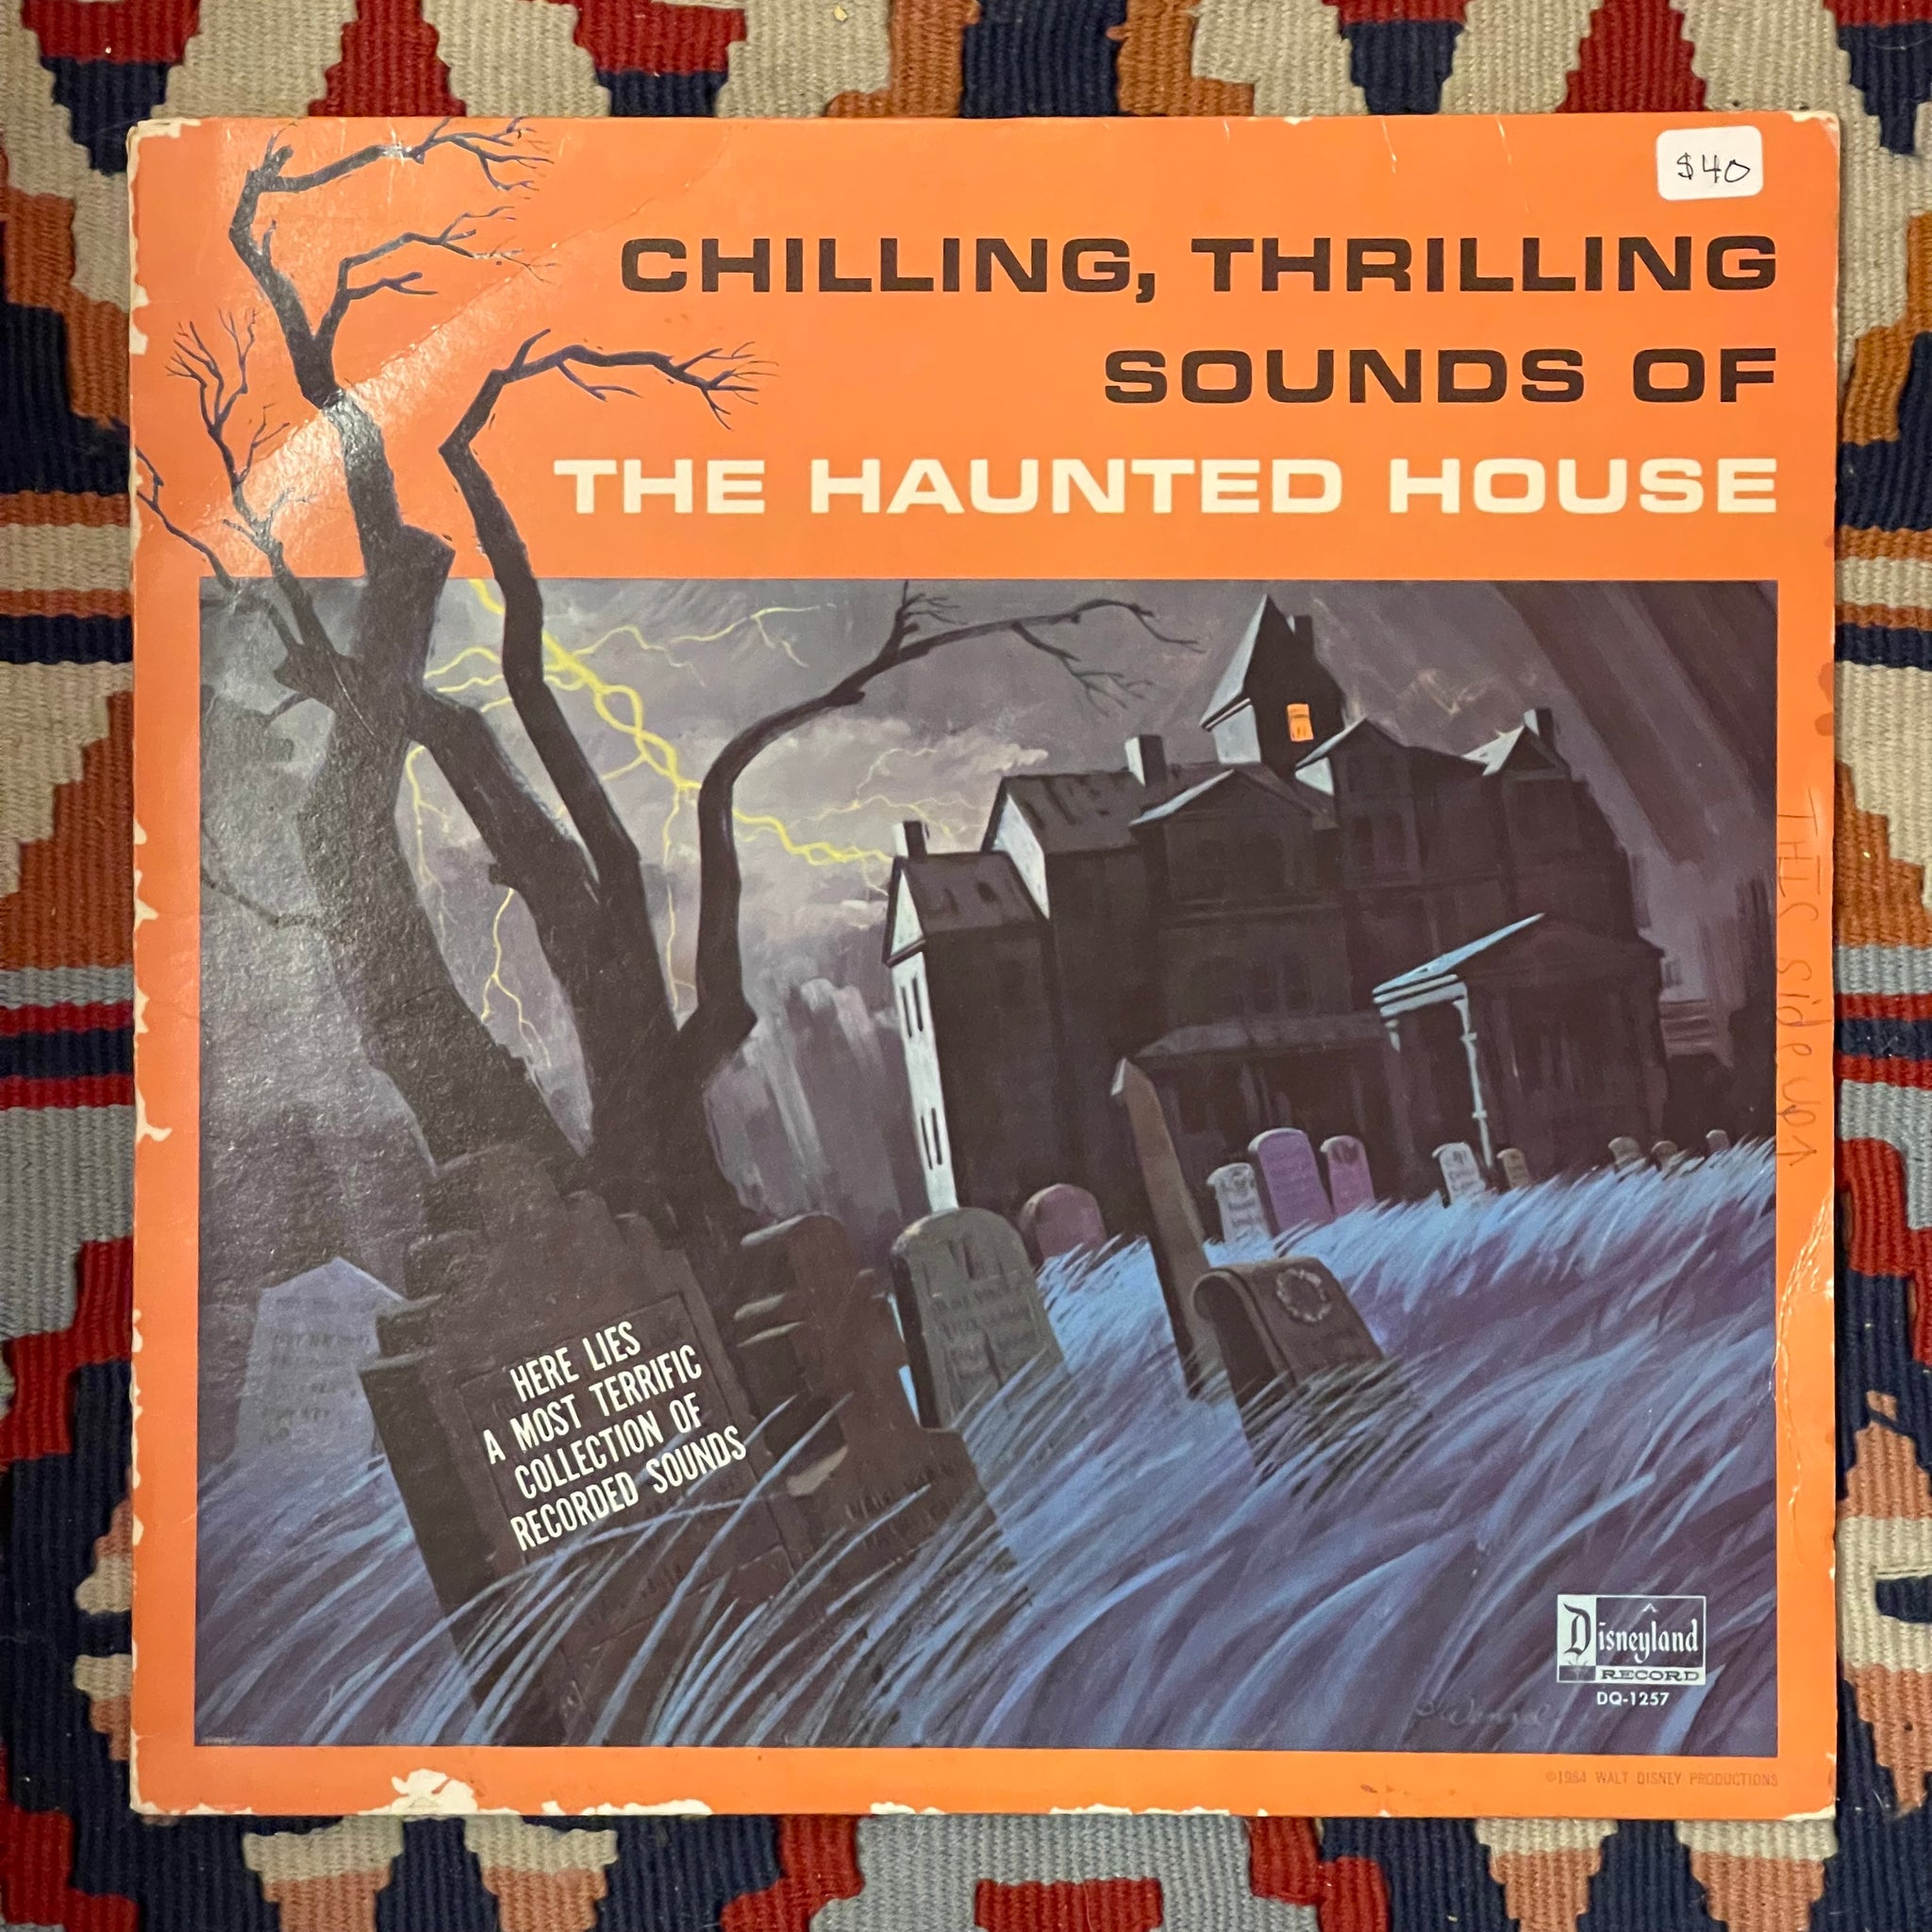 Disneyland’s -Chilling, Thrilling Sounds of the Haunted House